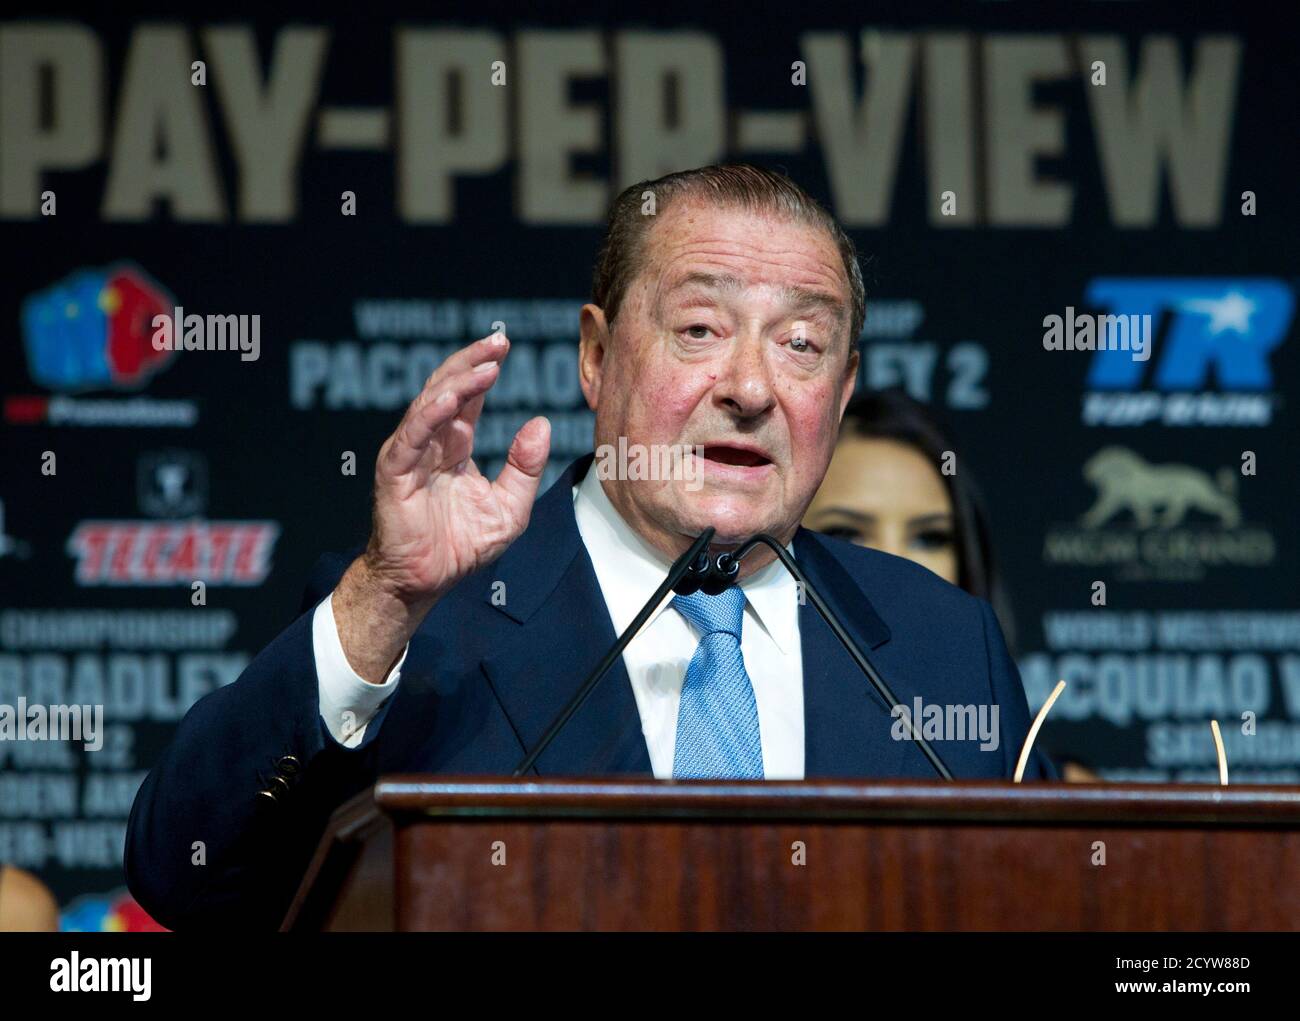 Boxing promoter Bob Arum, CEO of Top Rank, speaks during a boxing news  conference at the MGM Grand Hotel and Casino in Las Vegas, Nevada April 9,  2014. Manny Pacquiao of the